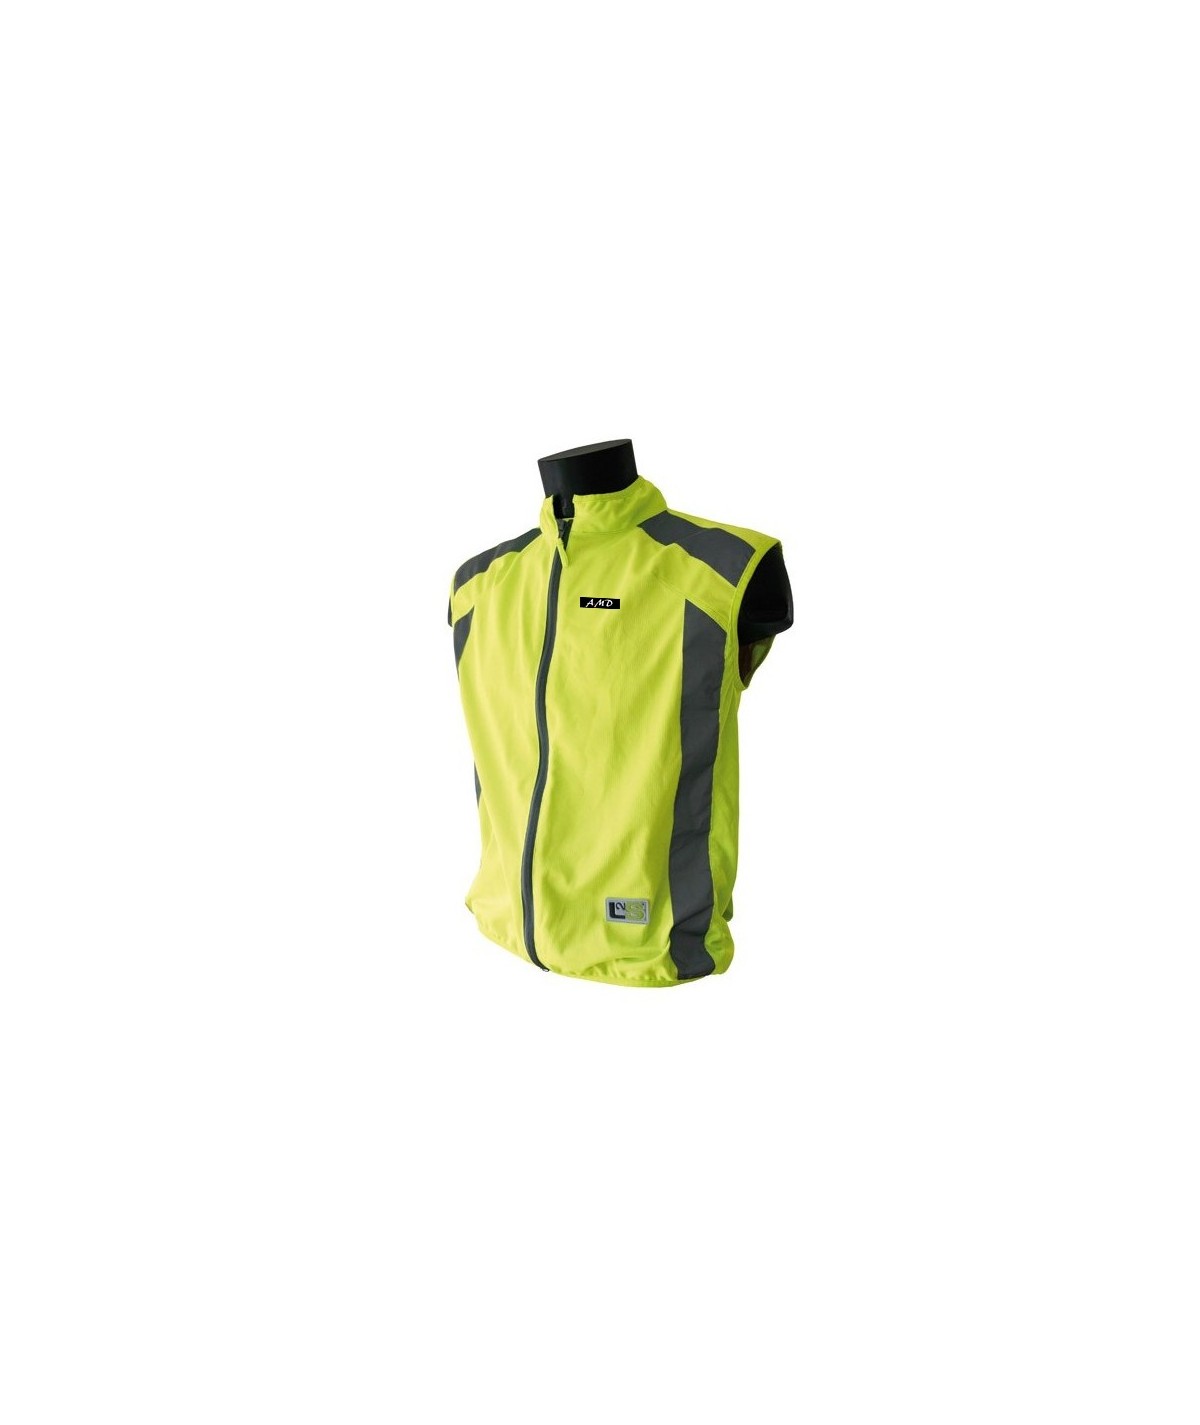 Gilet fluo cycliste - L2S VISIOPLUS - rose fluo 